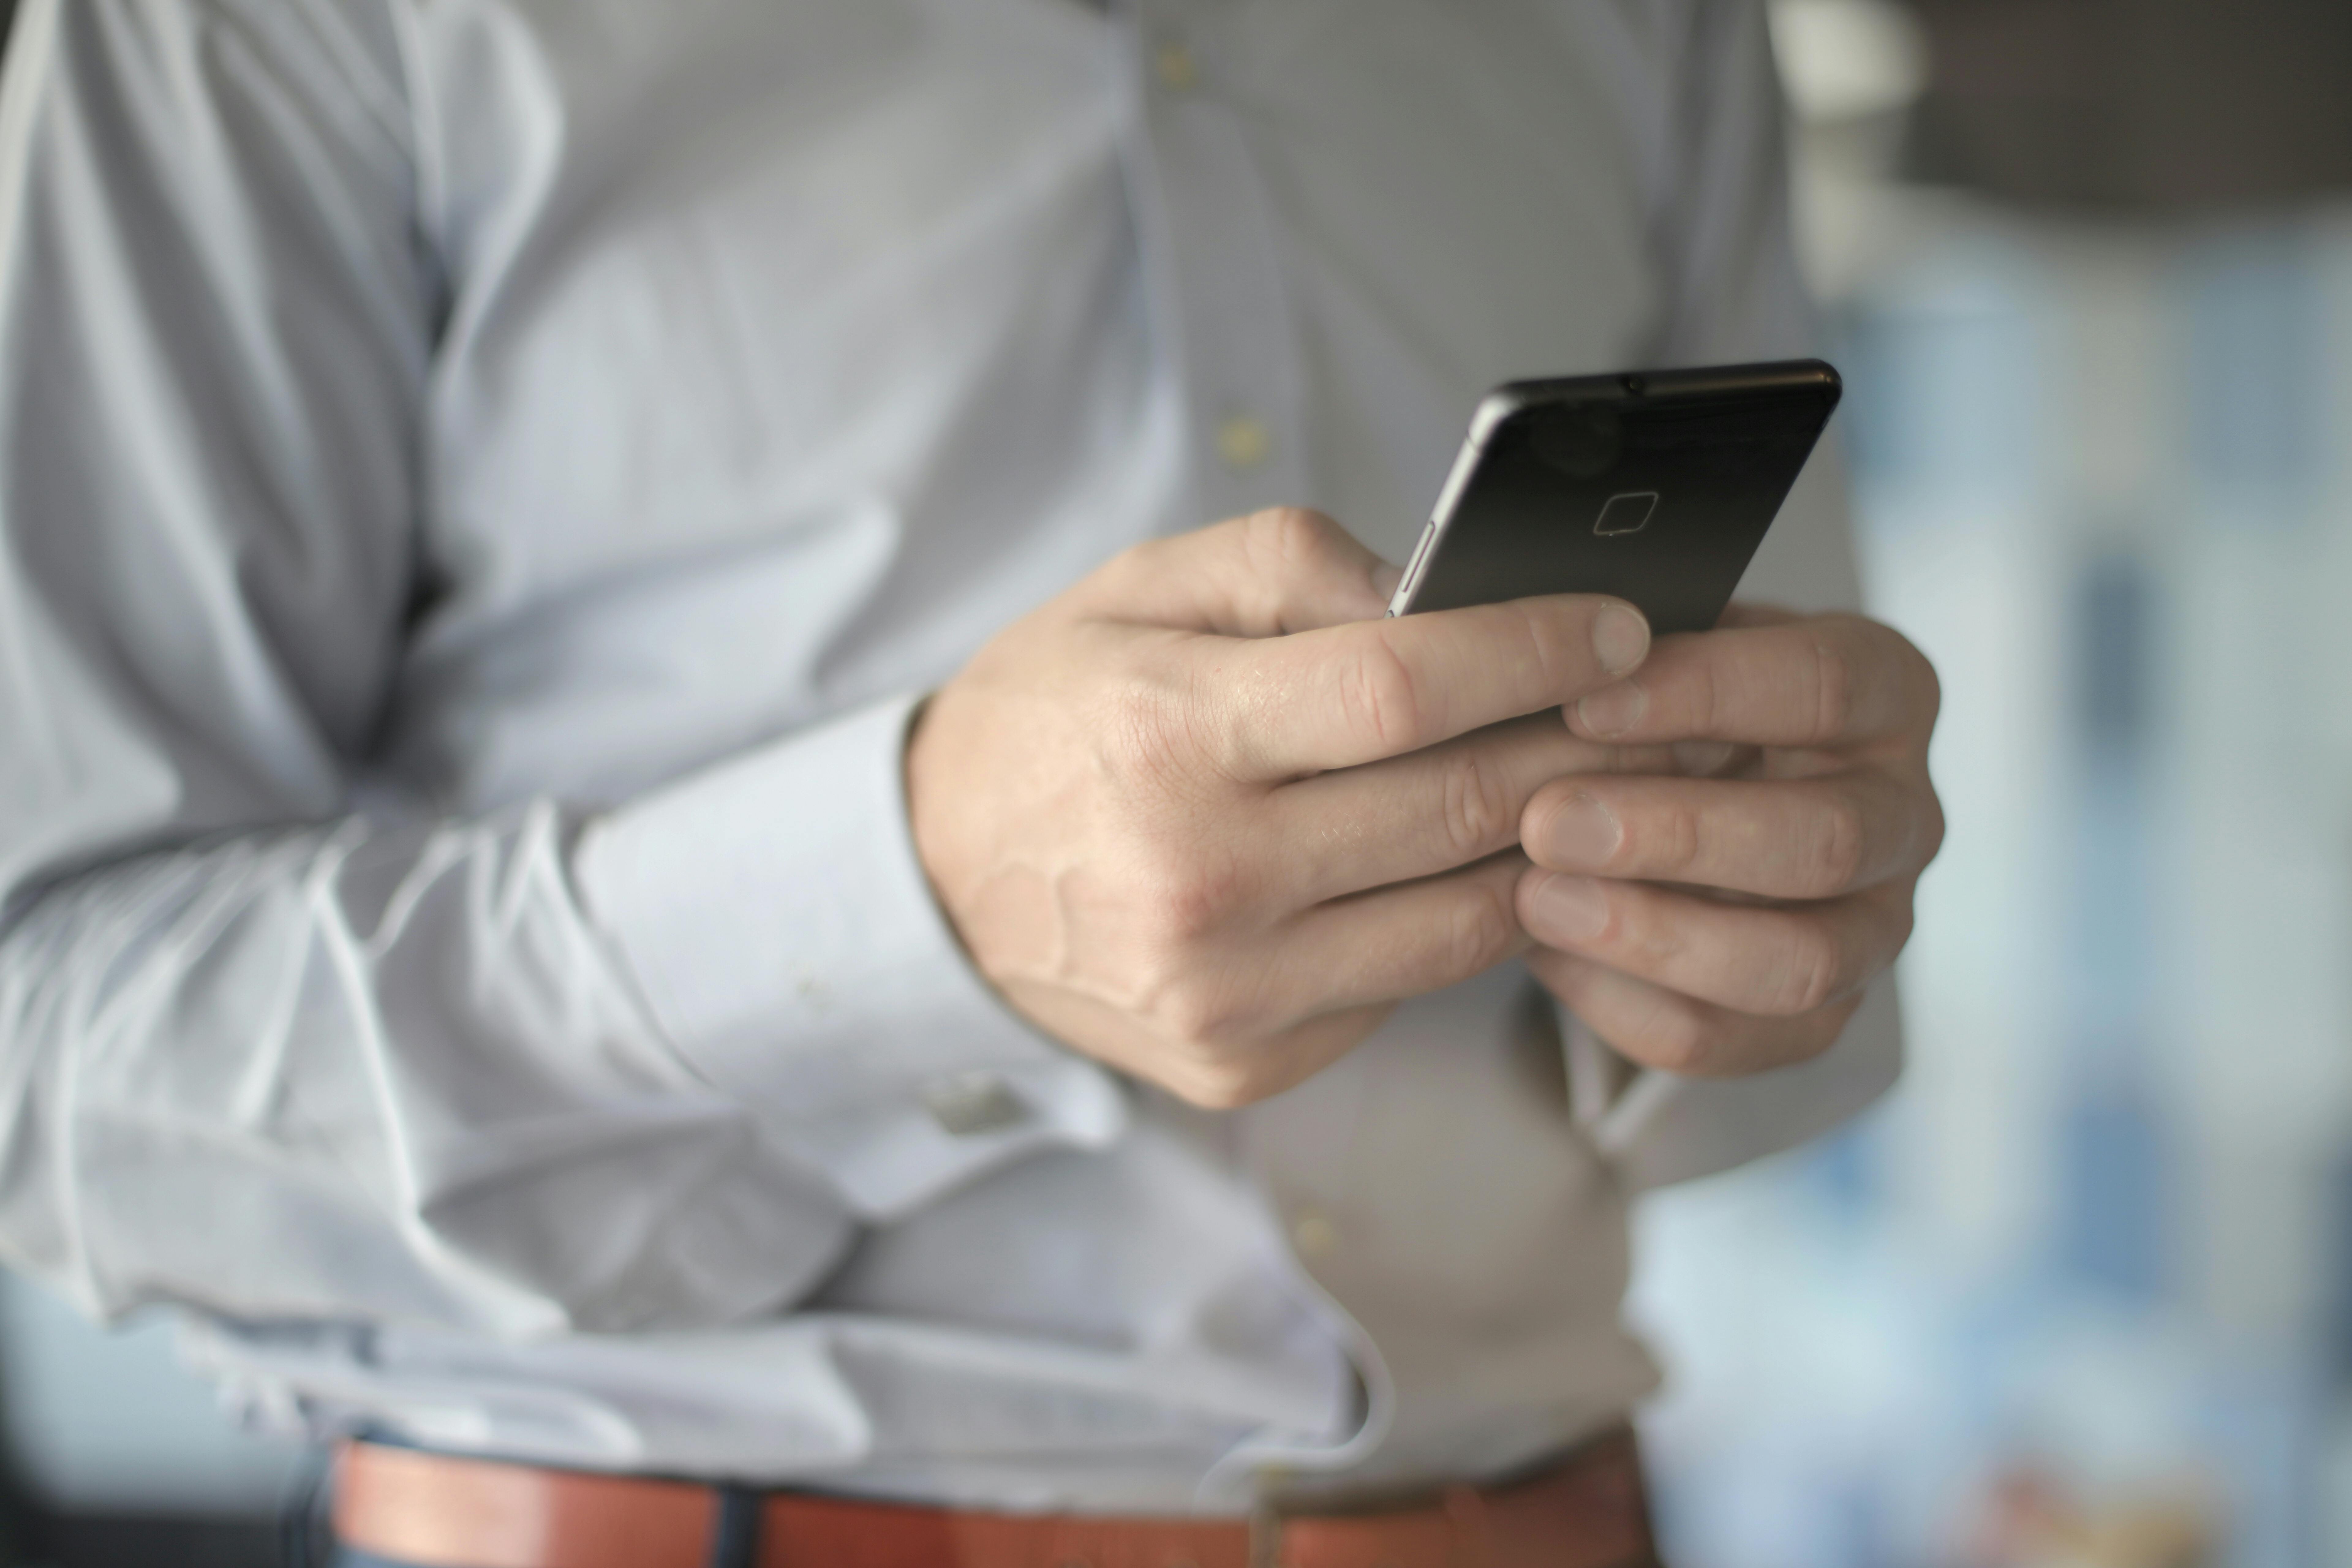 A man holding a phone | Source: Pexels